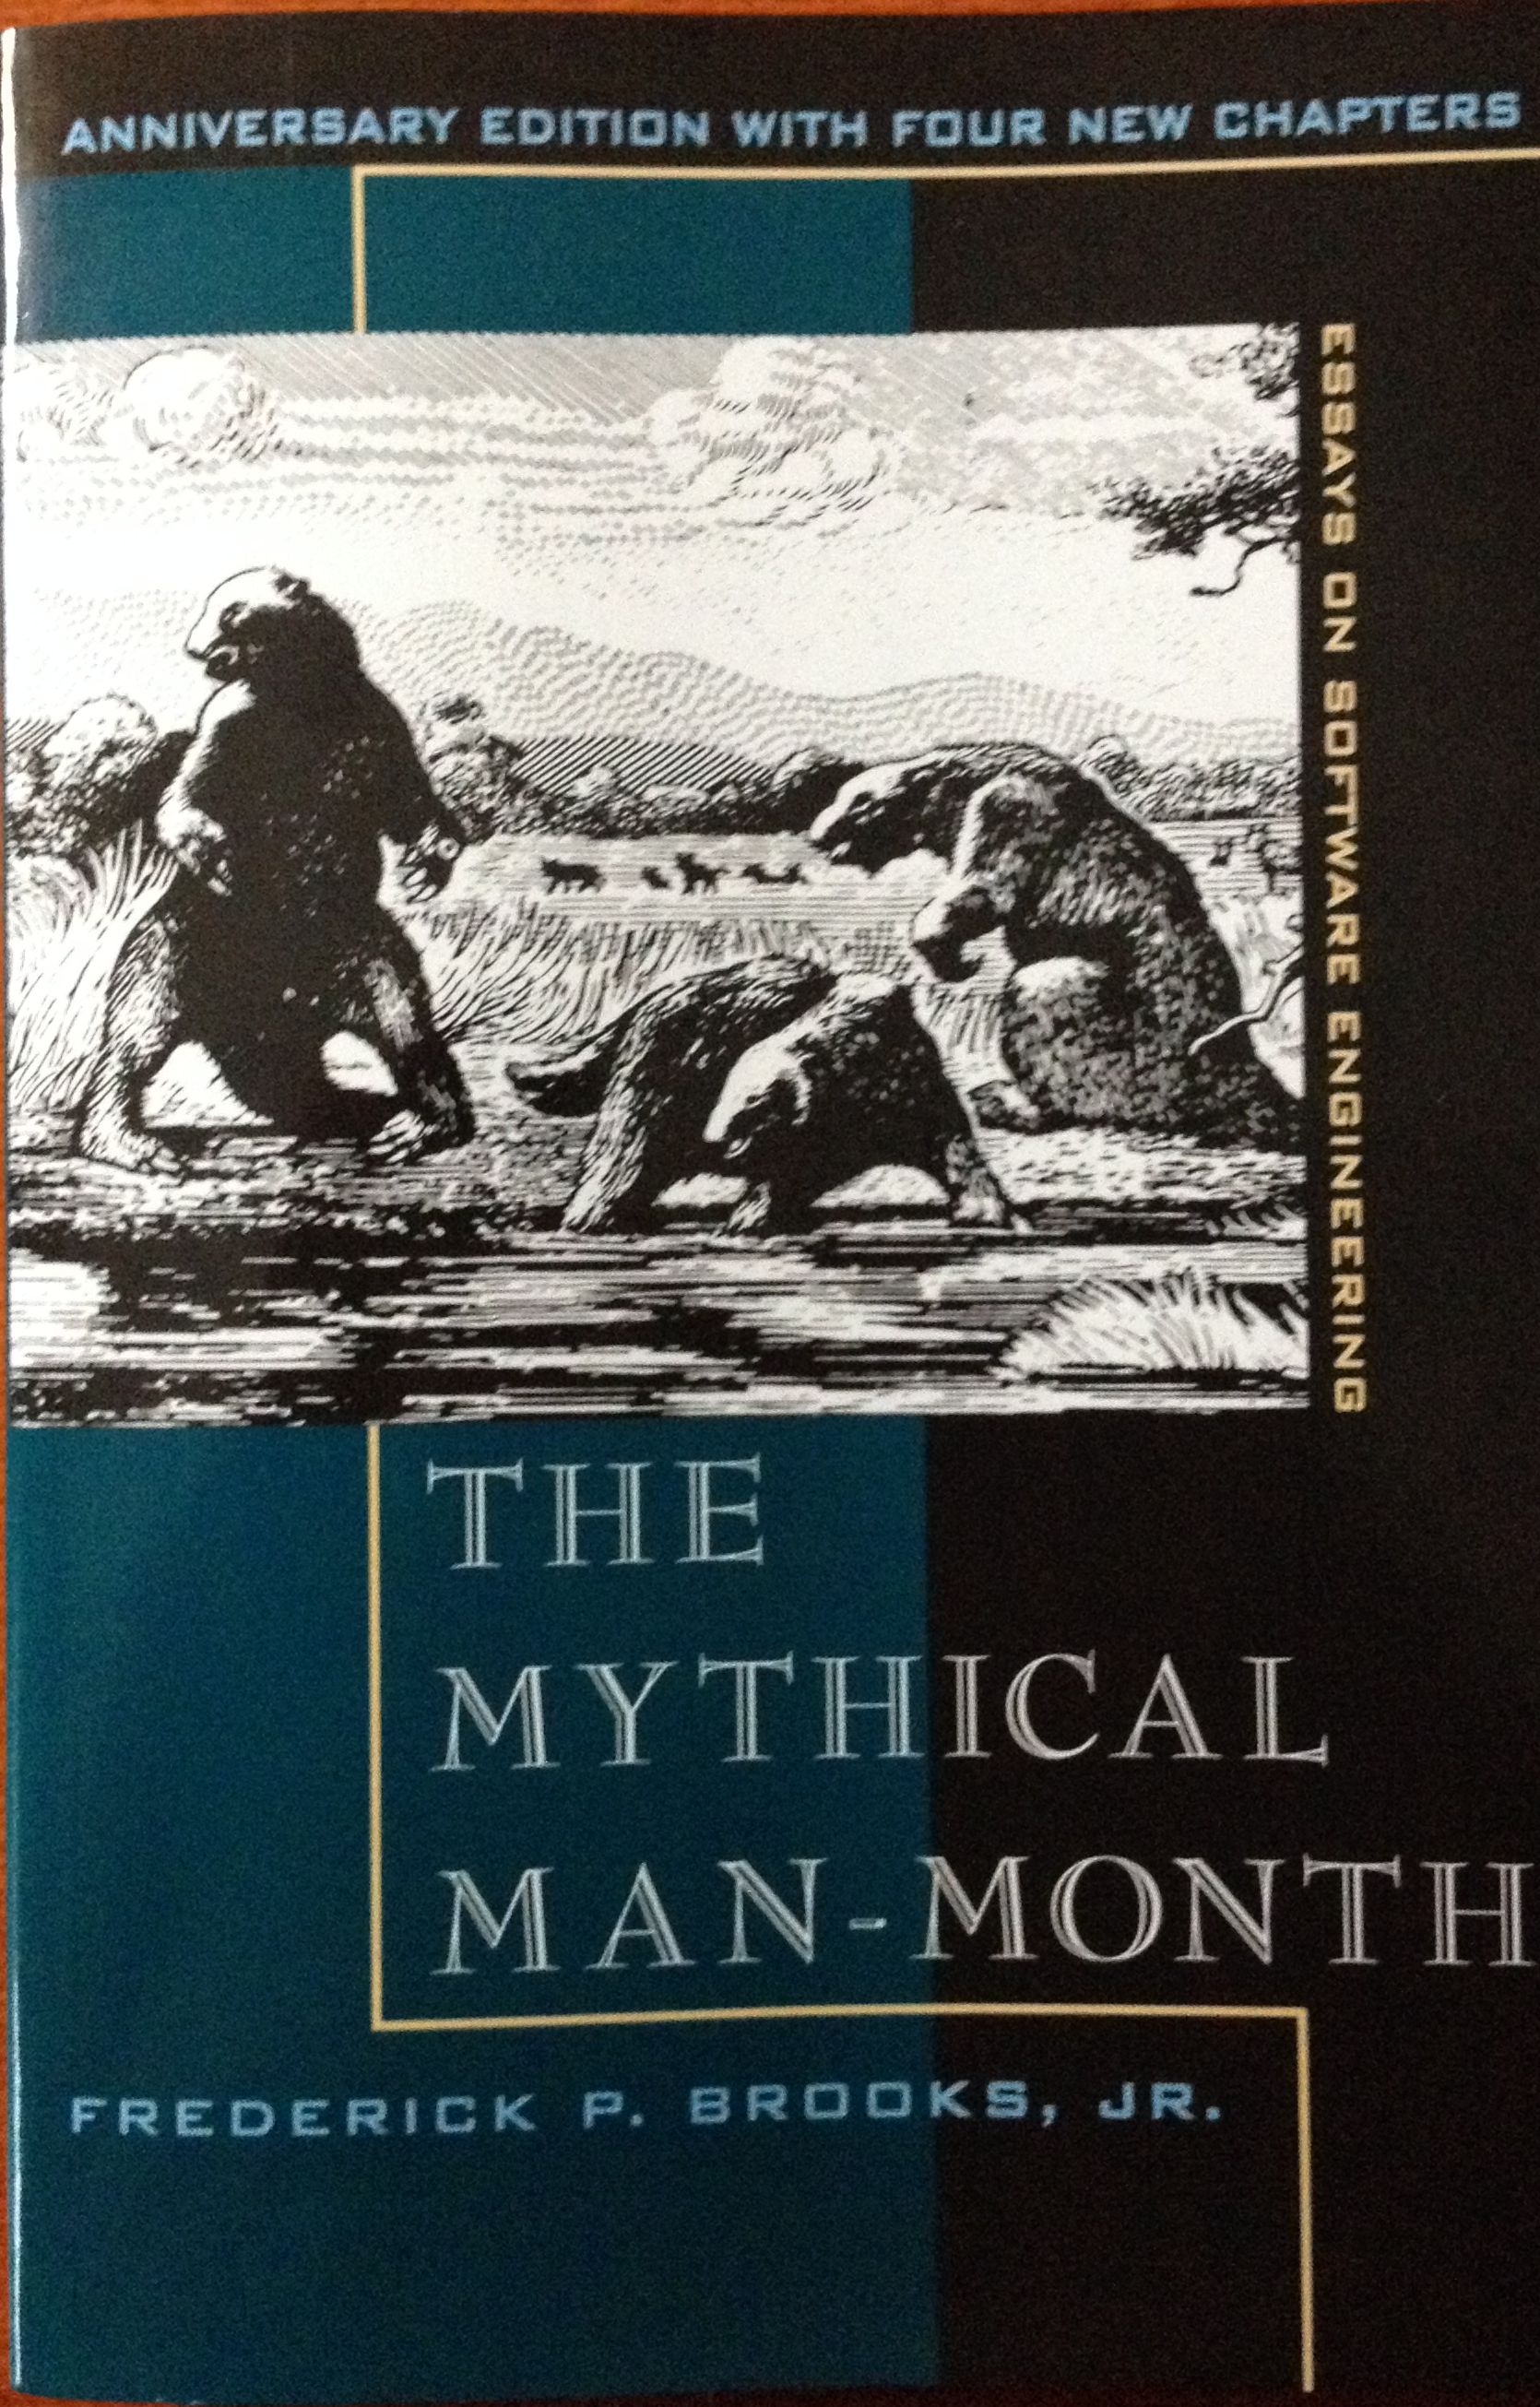 Man month. The Mythical man-month: essays on software Engineering, Anniversary Edition (2nd Edition).